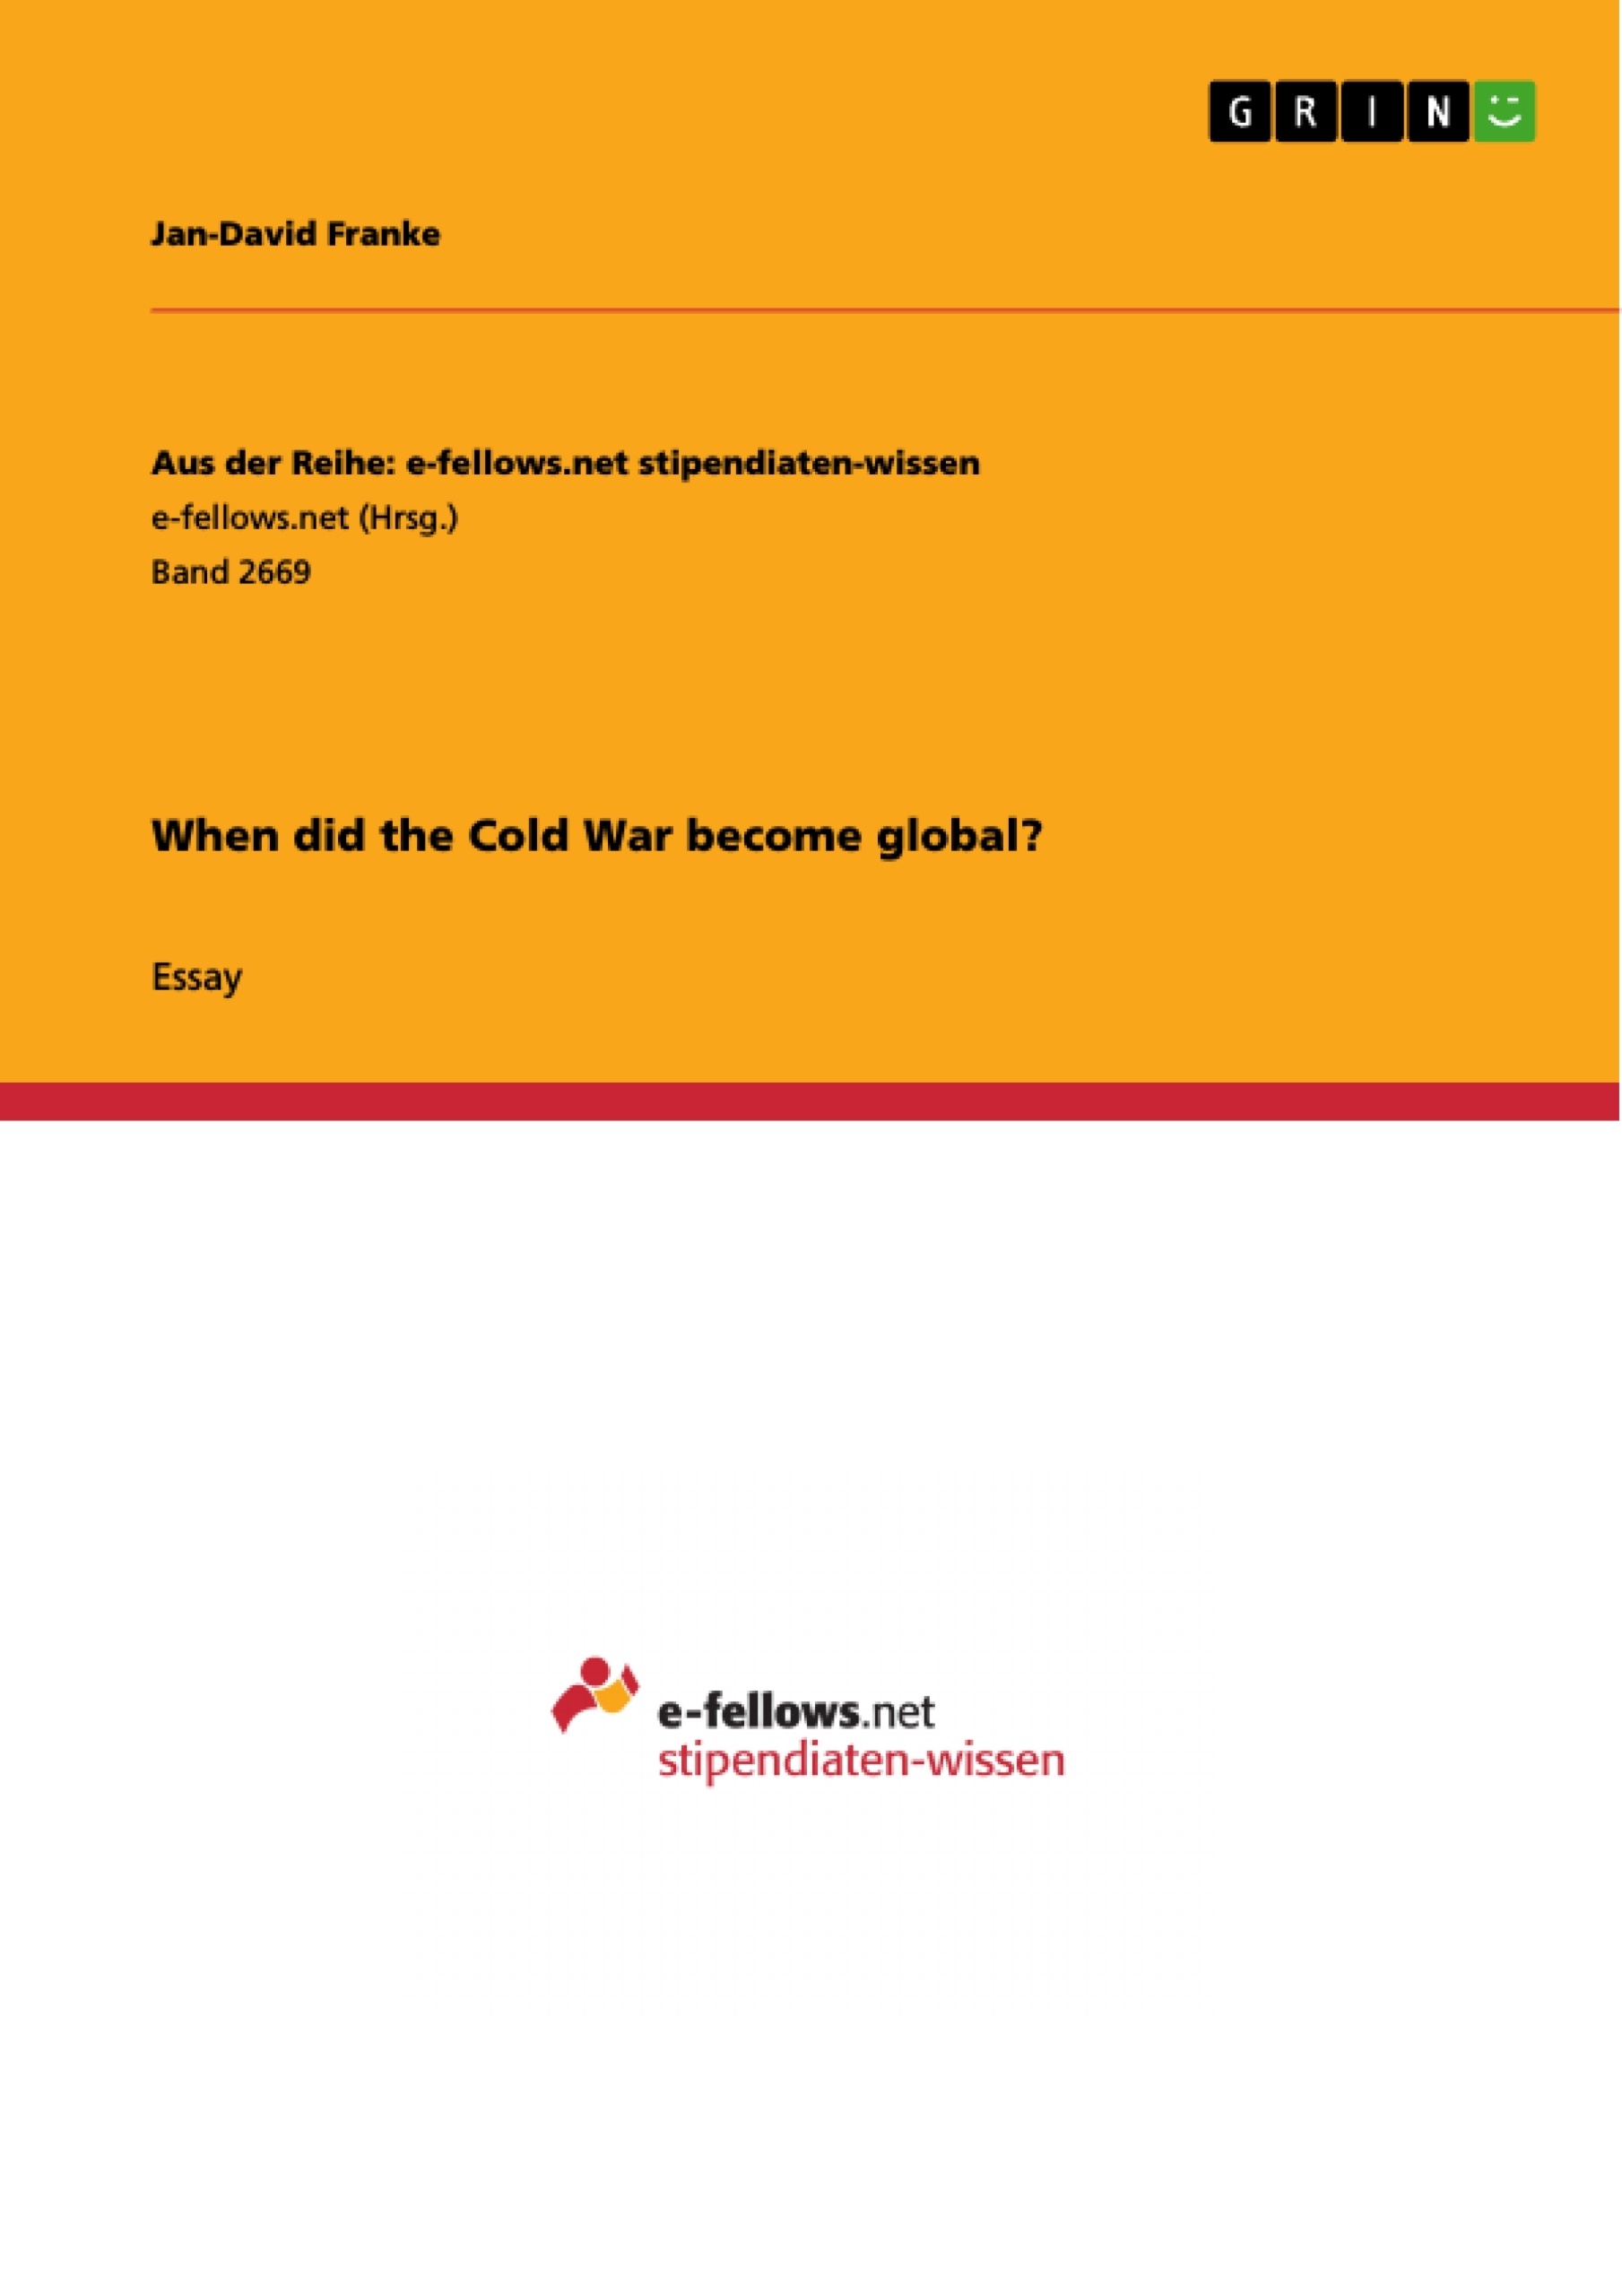 Title: When did the Cold War become global?